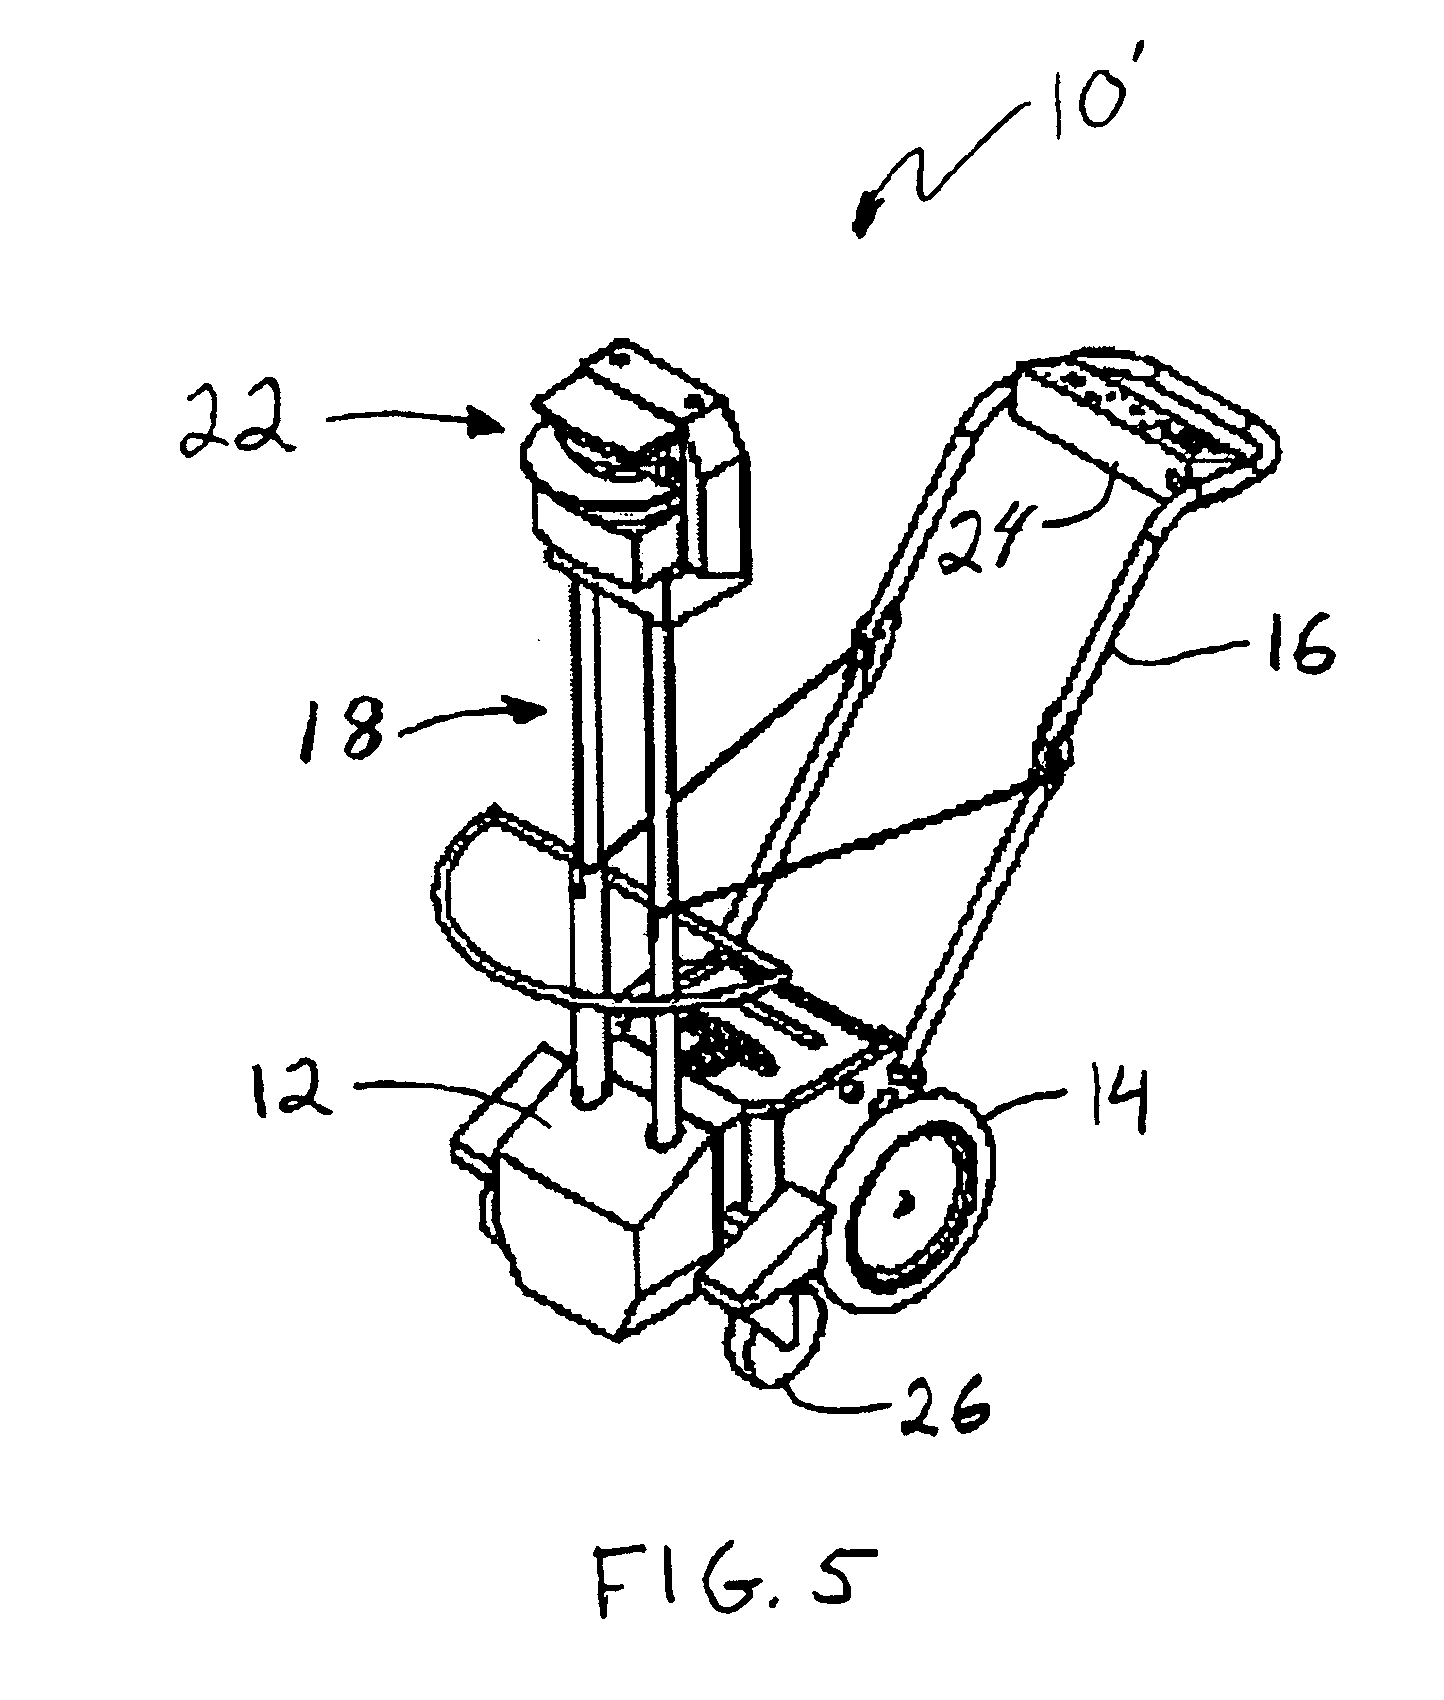 Spatial data collection apparatus and method